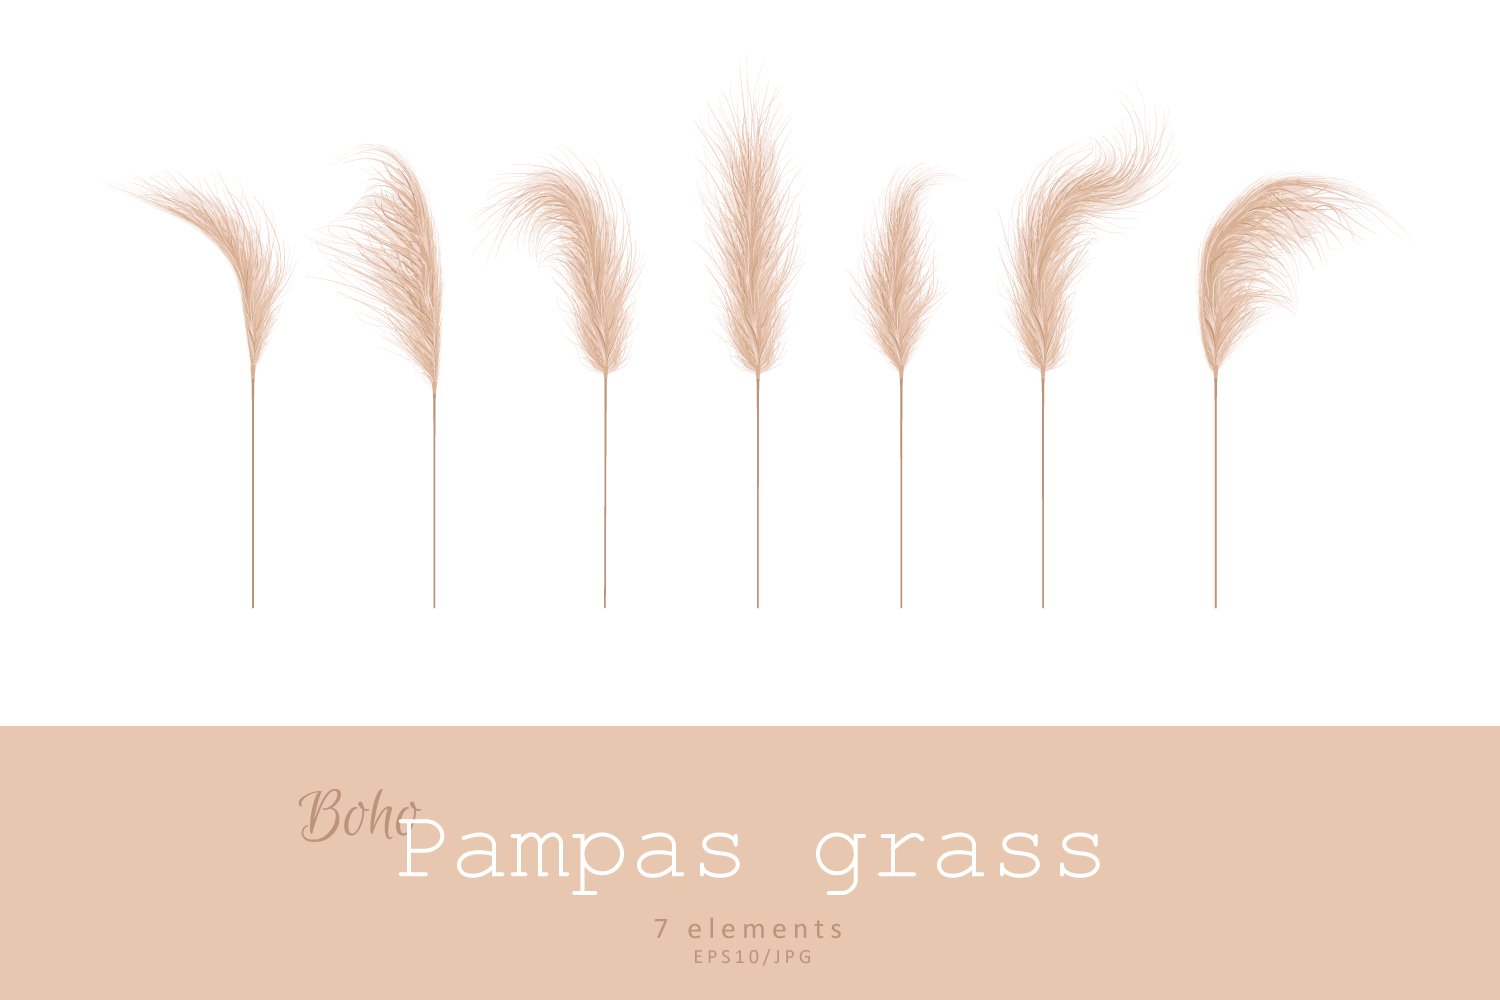 Set of five different types of pampas grass.